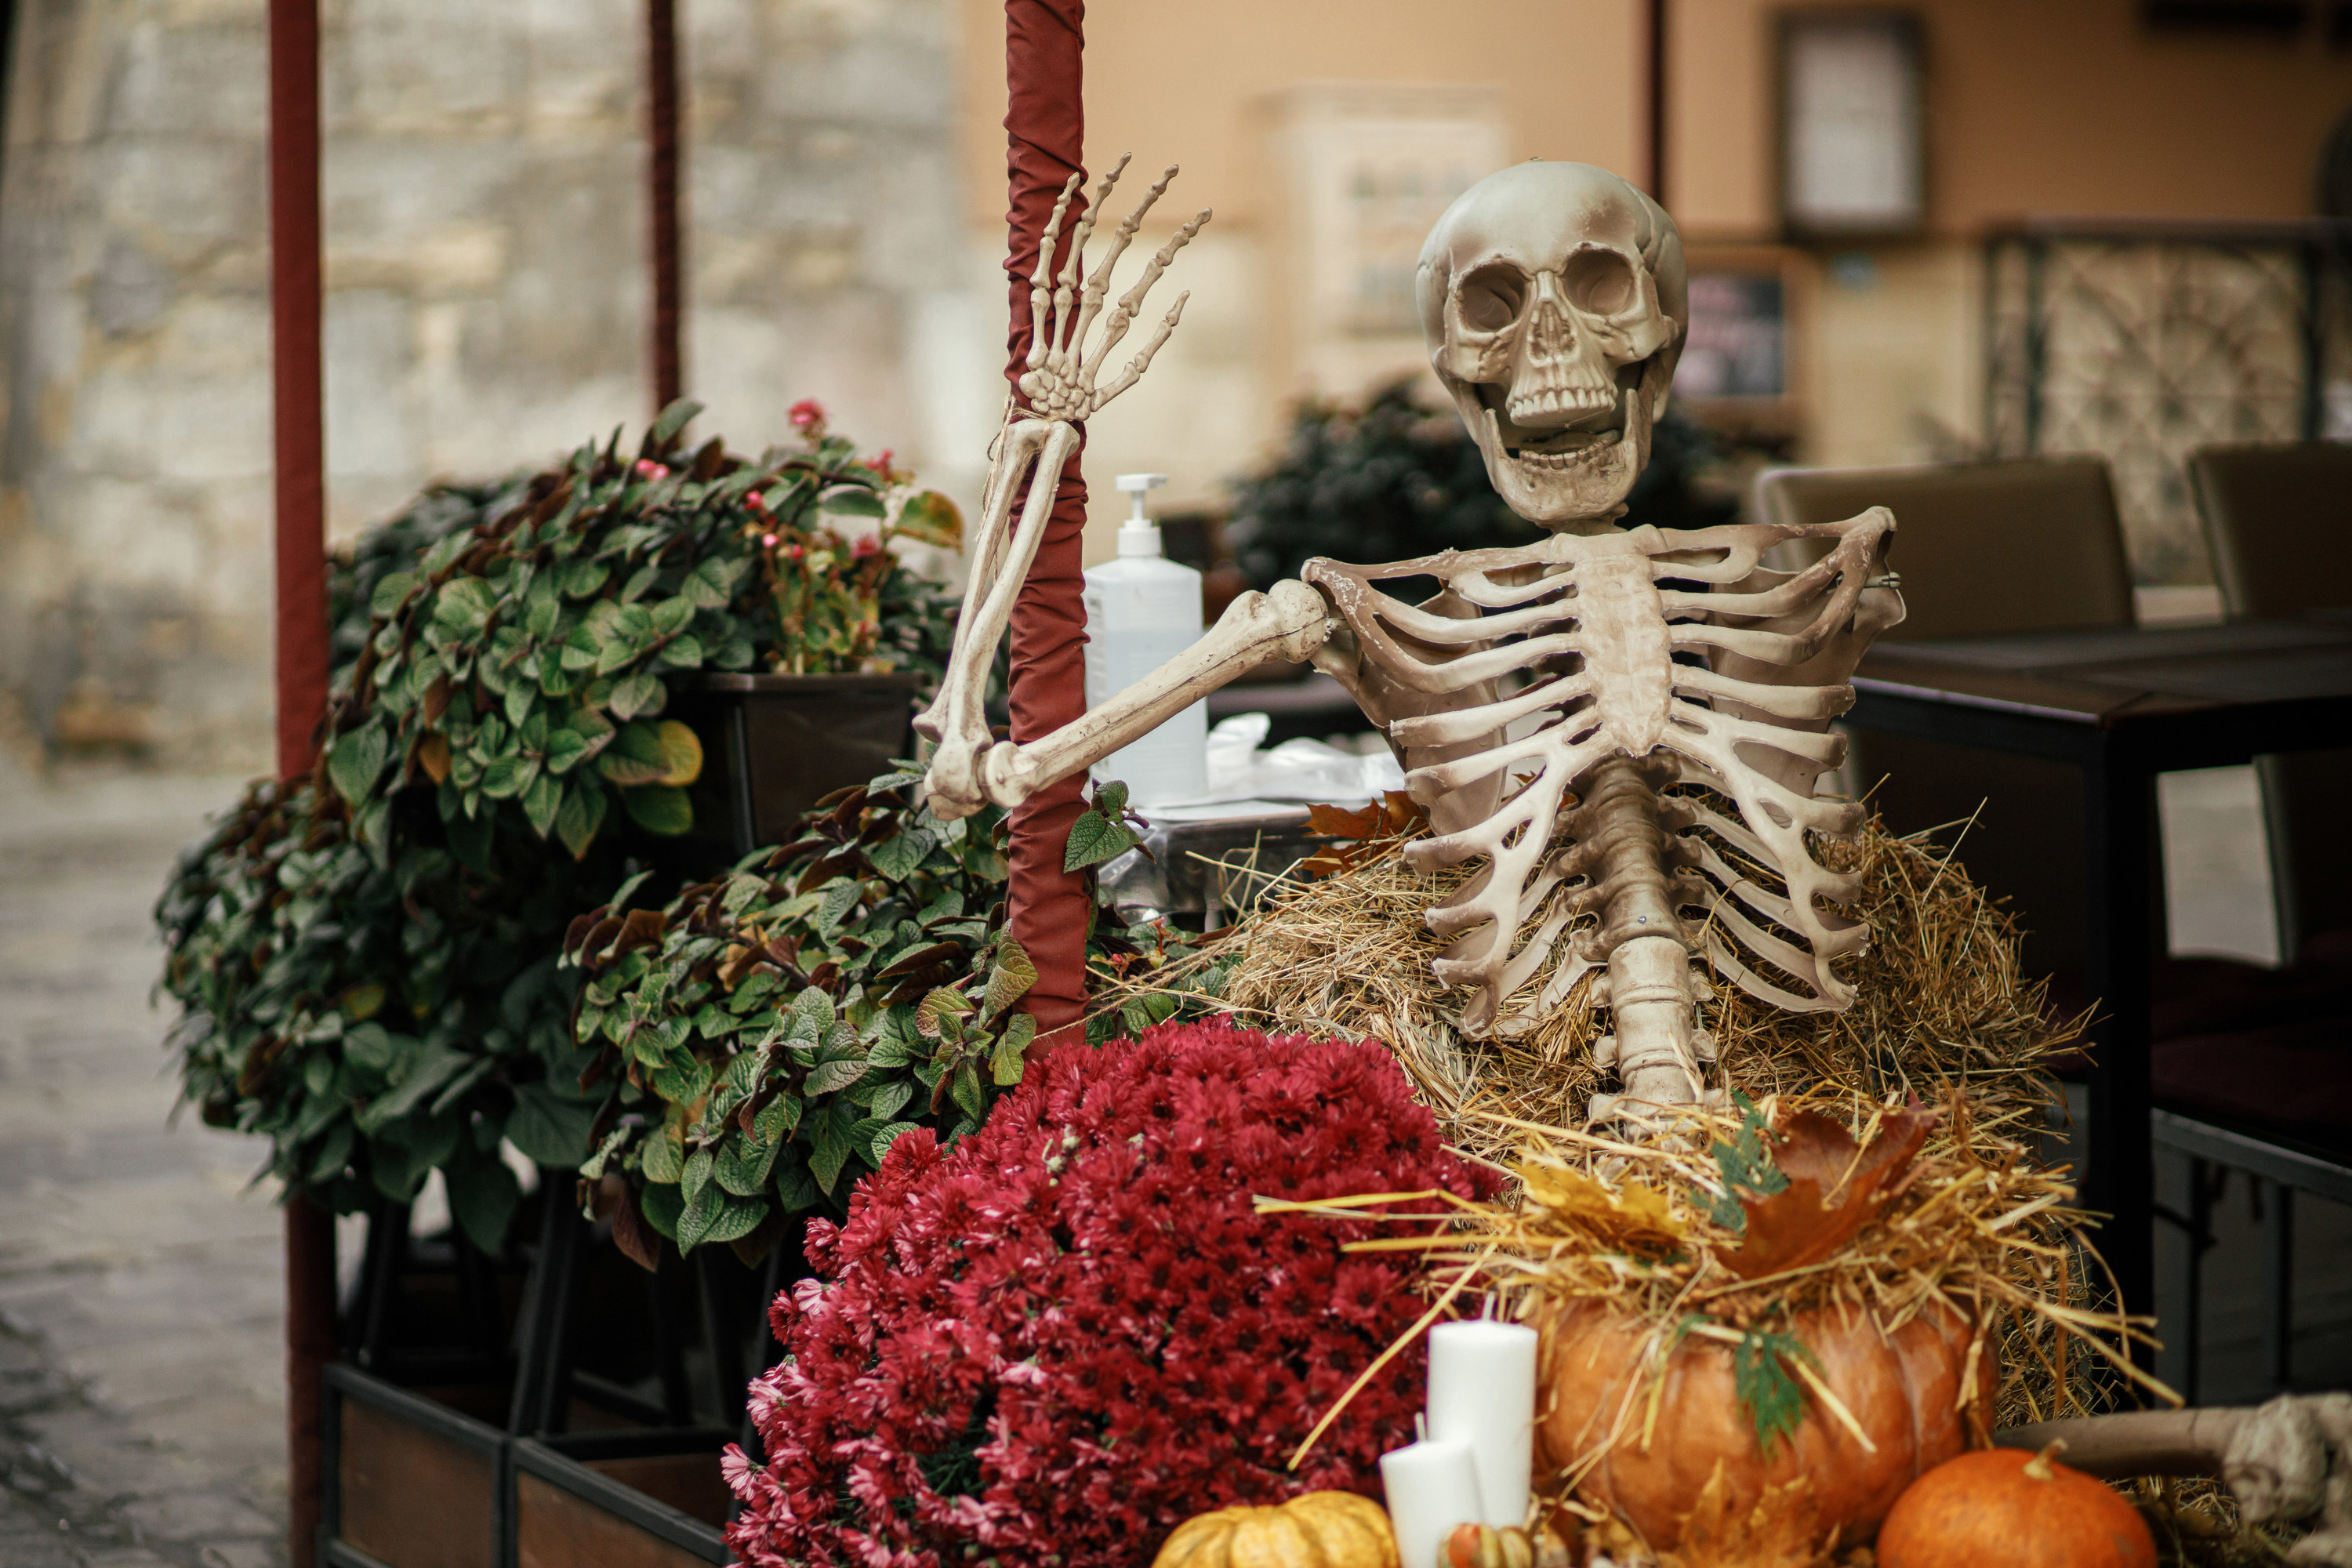 Scary skeleton sitting atop pumpkins, flowers and hay stacks in city street